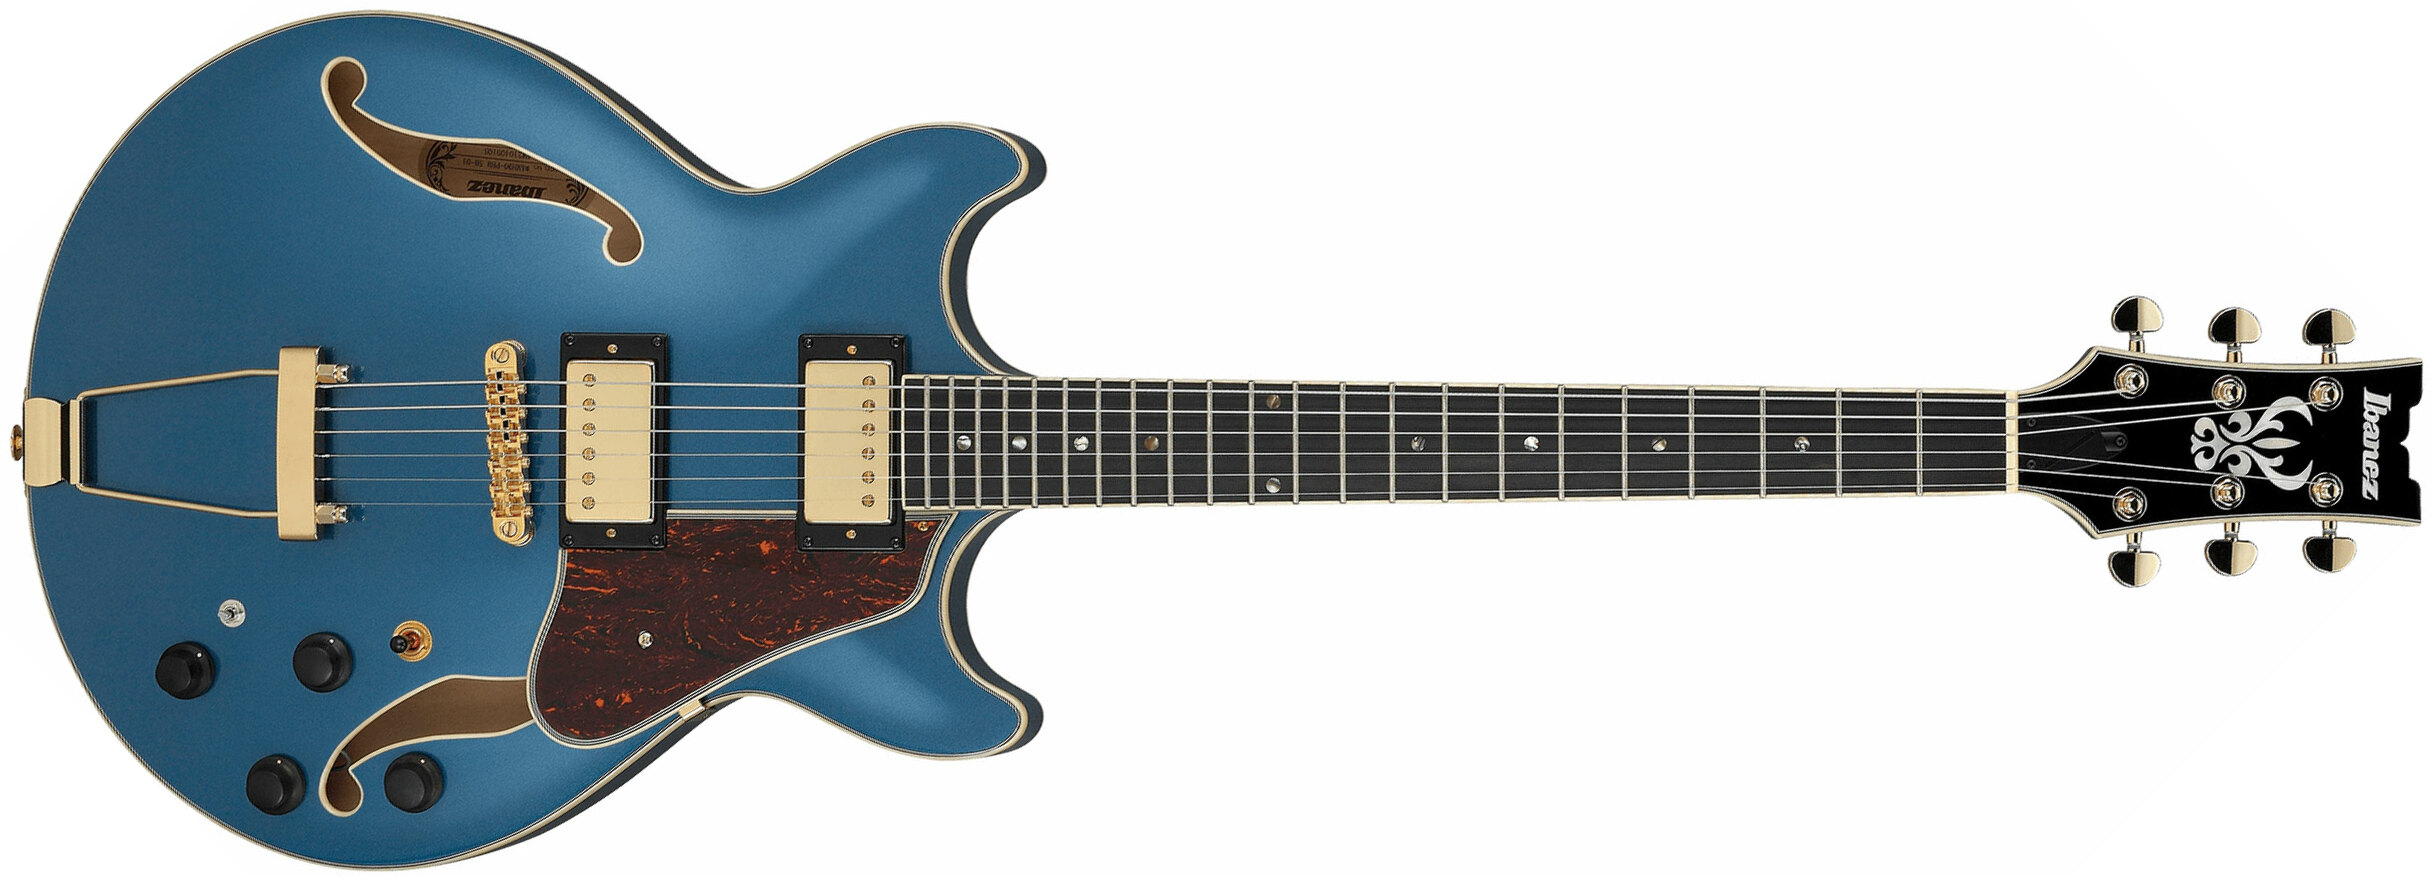 Ibanez Amh90 Pbm Artcore Expressionist 2h Ht Eb - Prussian Blue Metallic - Hollow-body electric guitar - Main picture